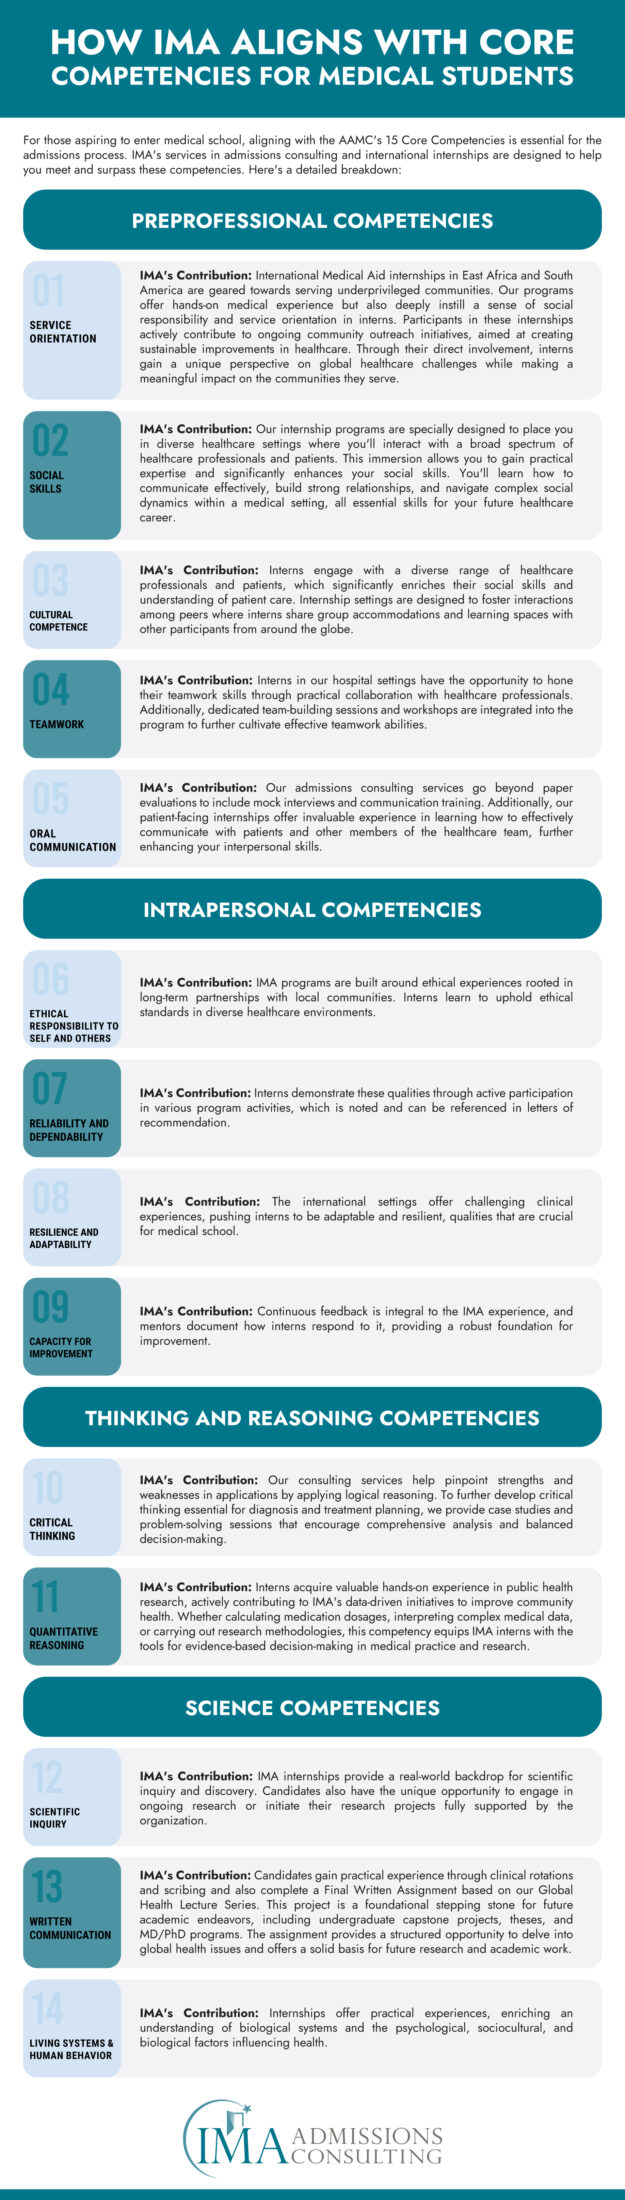 How IMA Aligns with Core Competencies for Medical Students